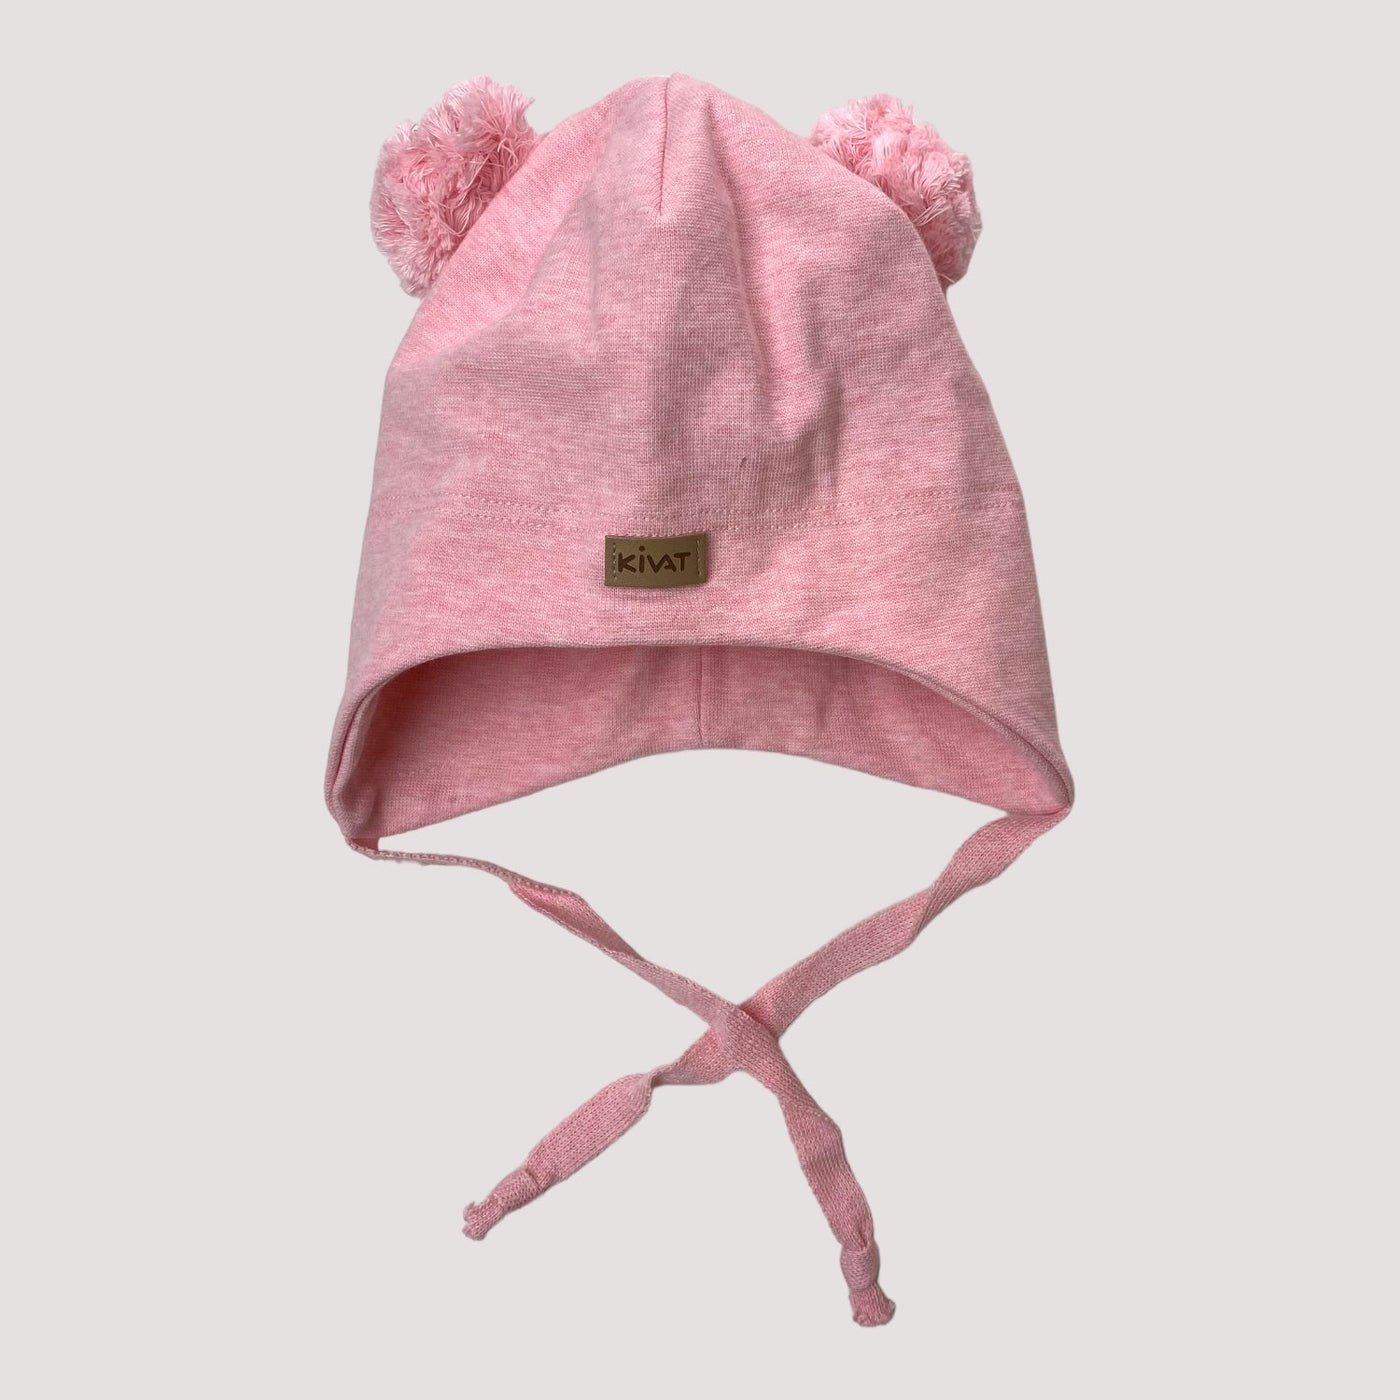 Kivat beanie with two poms, light pink | 5-8Y